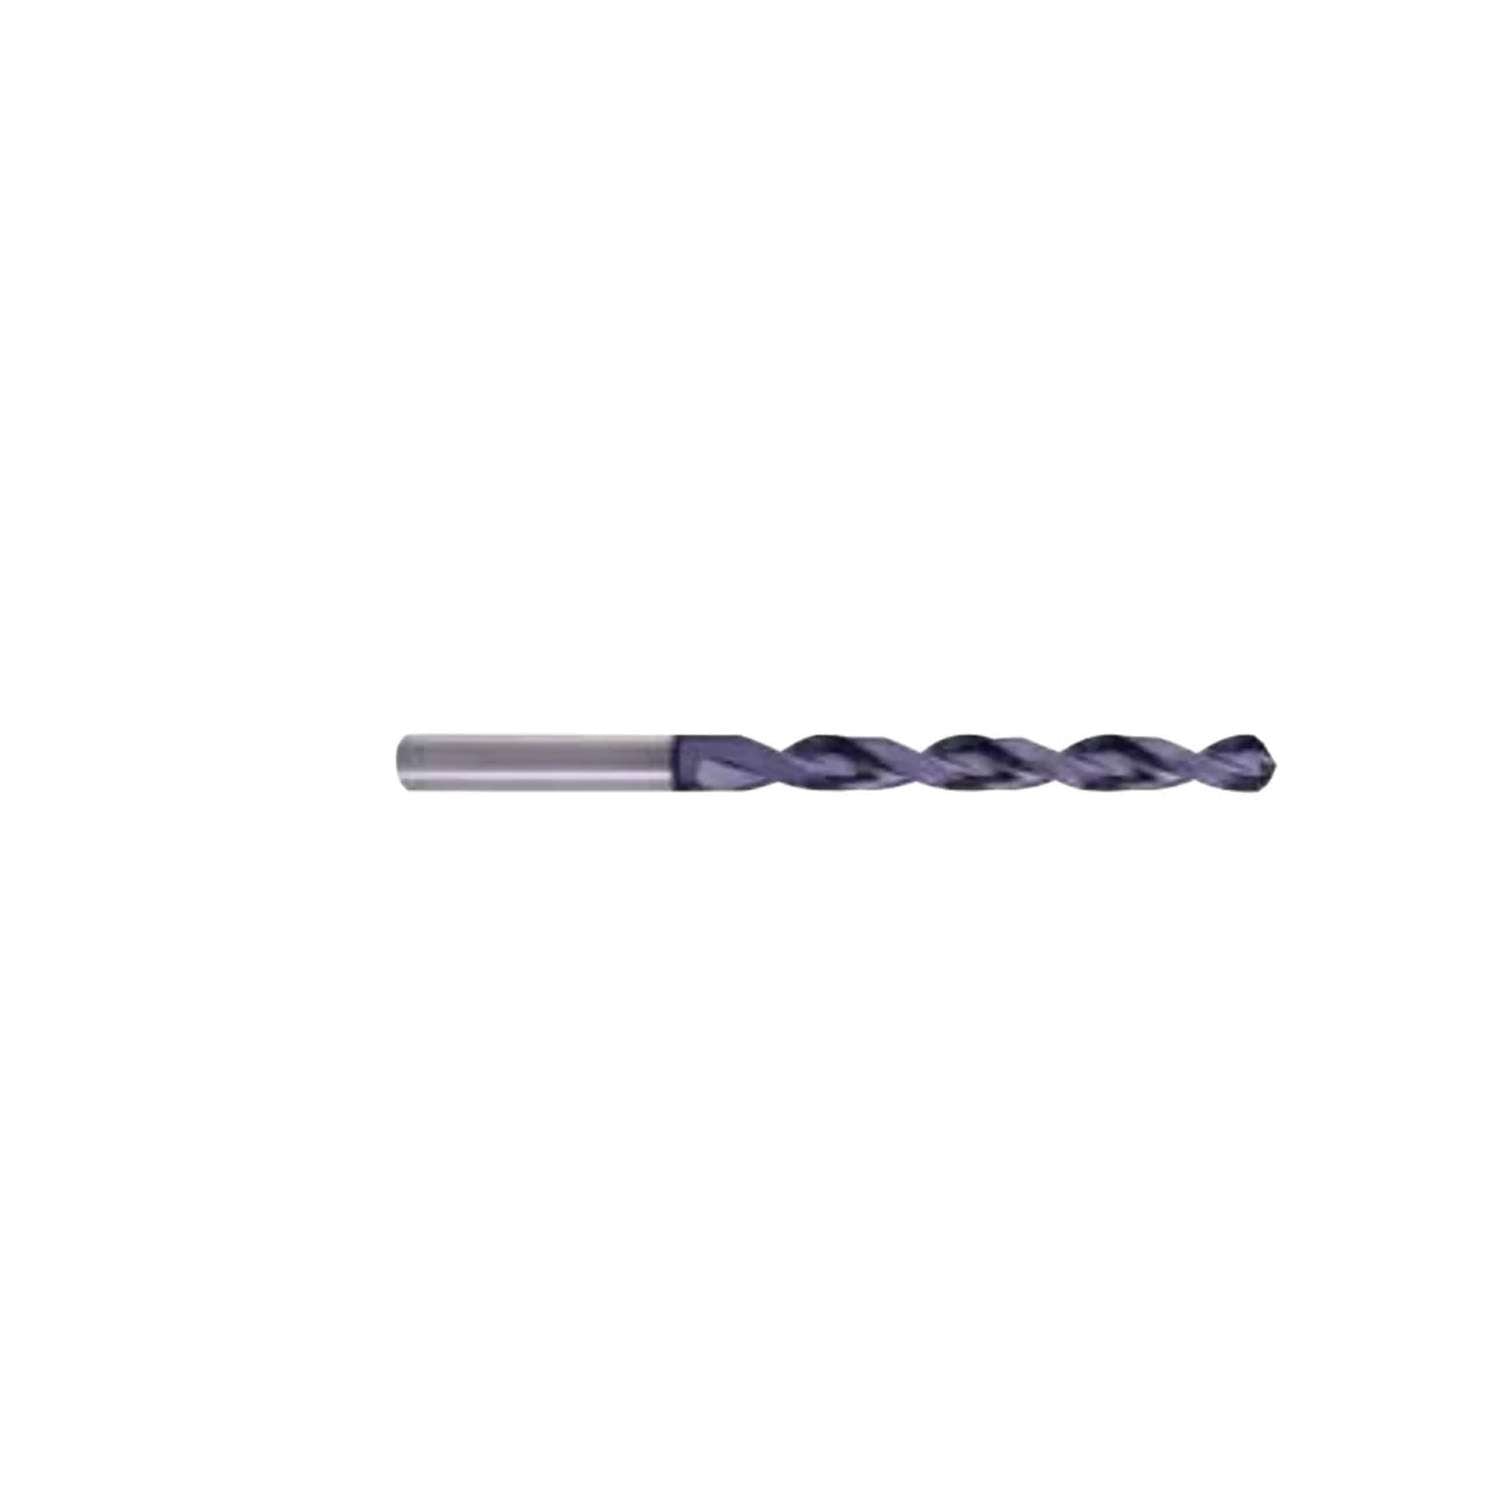 Specific cylindrical drill for ast iron record GG DIN 338 6,3 - ILIX